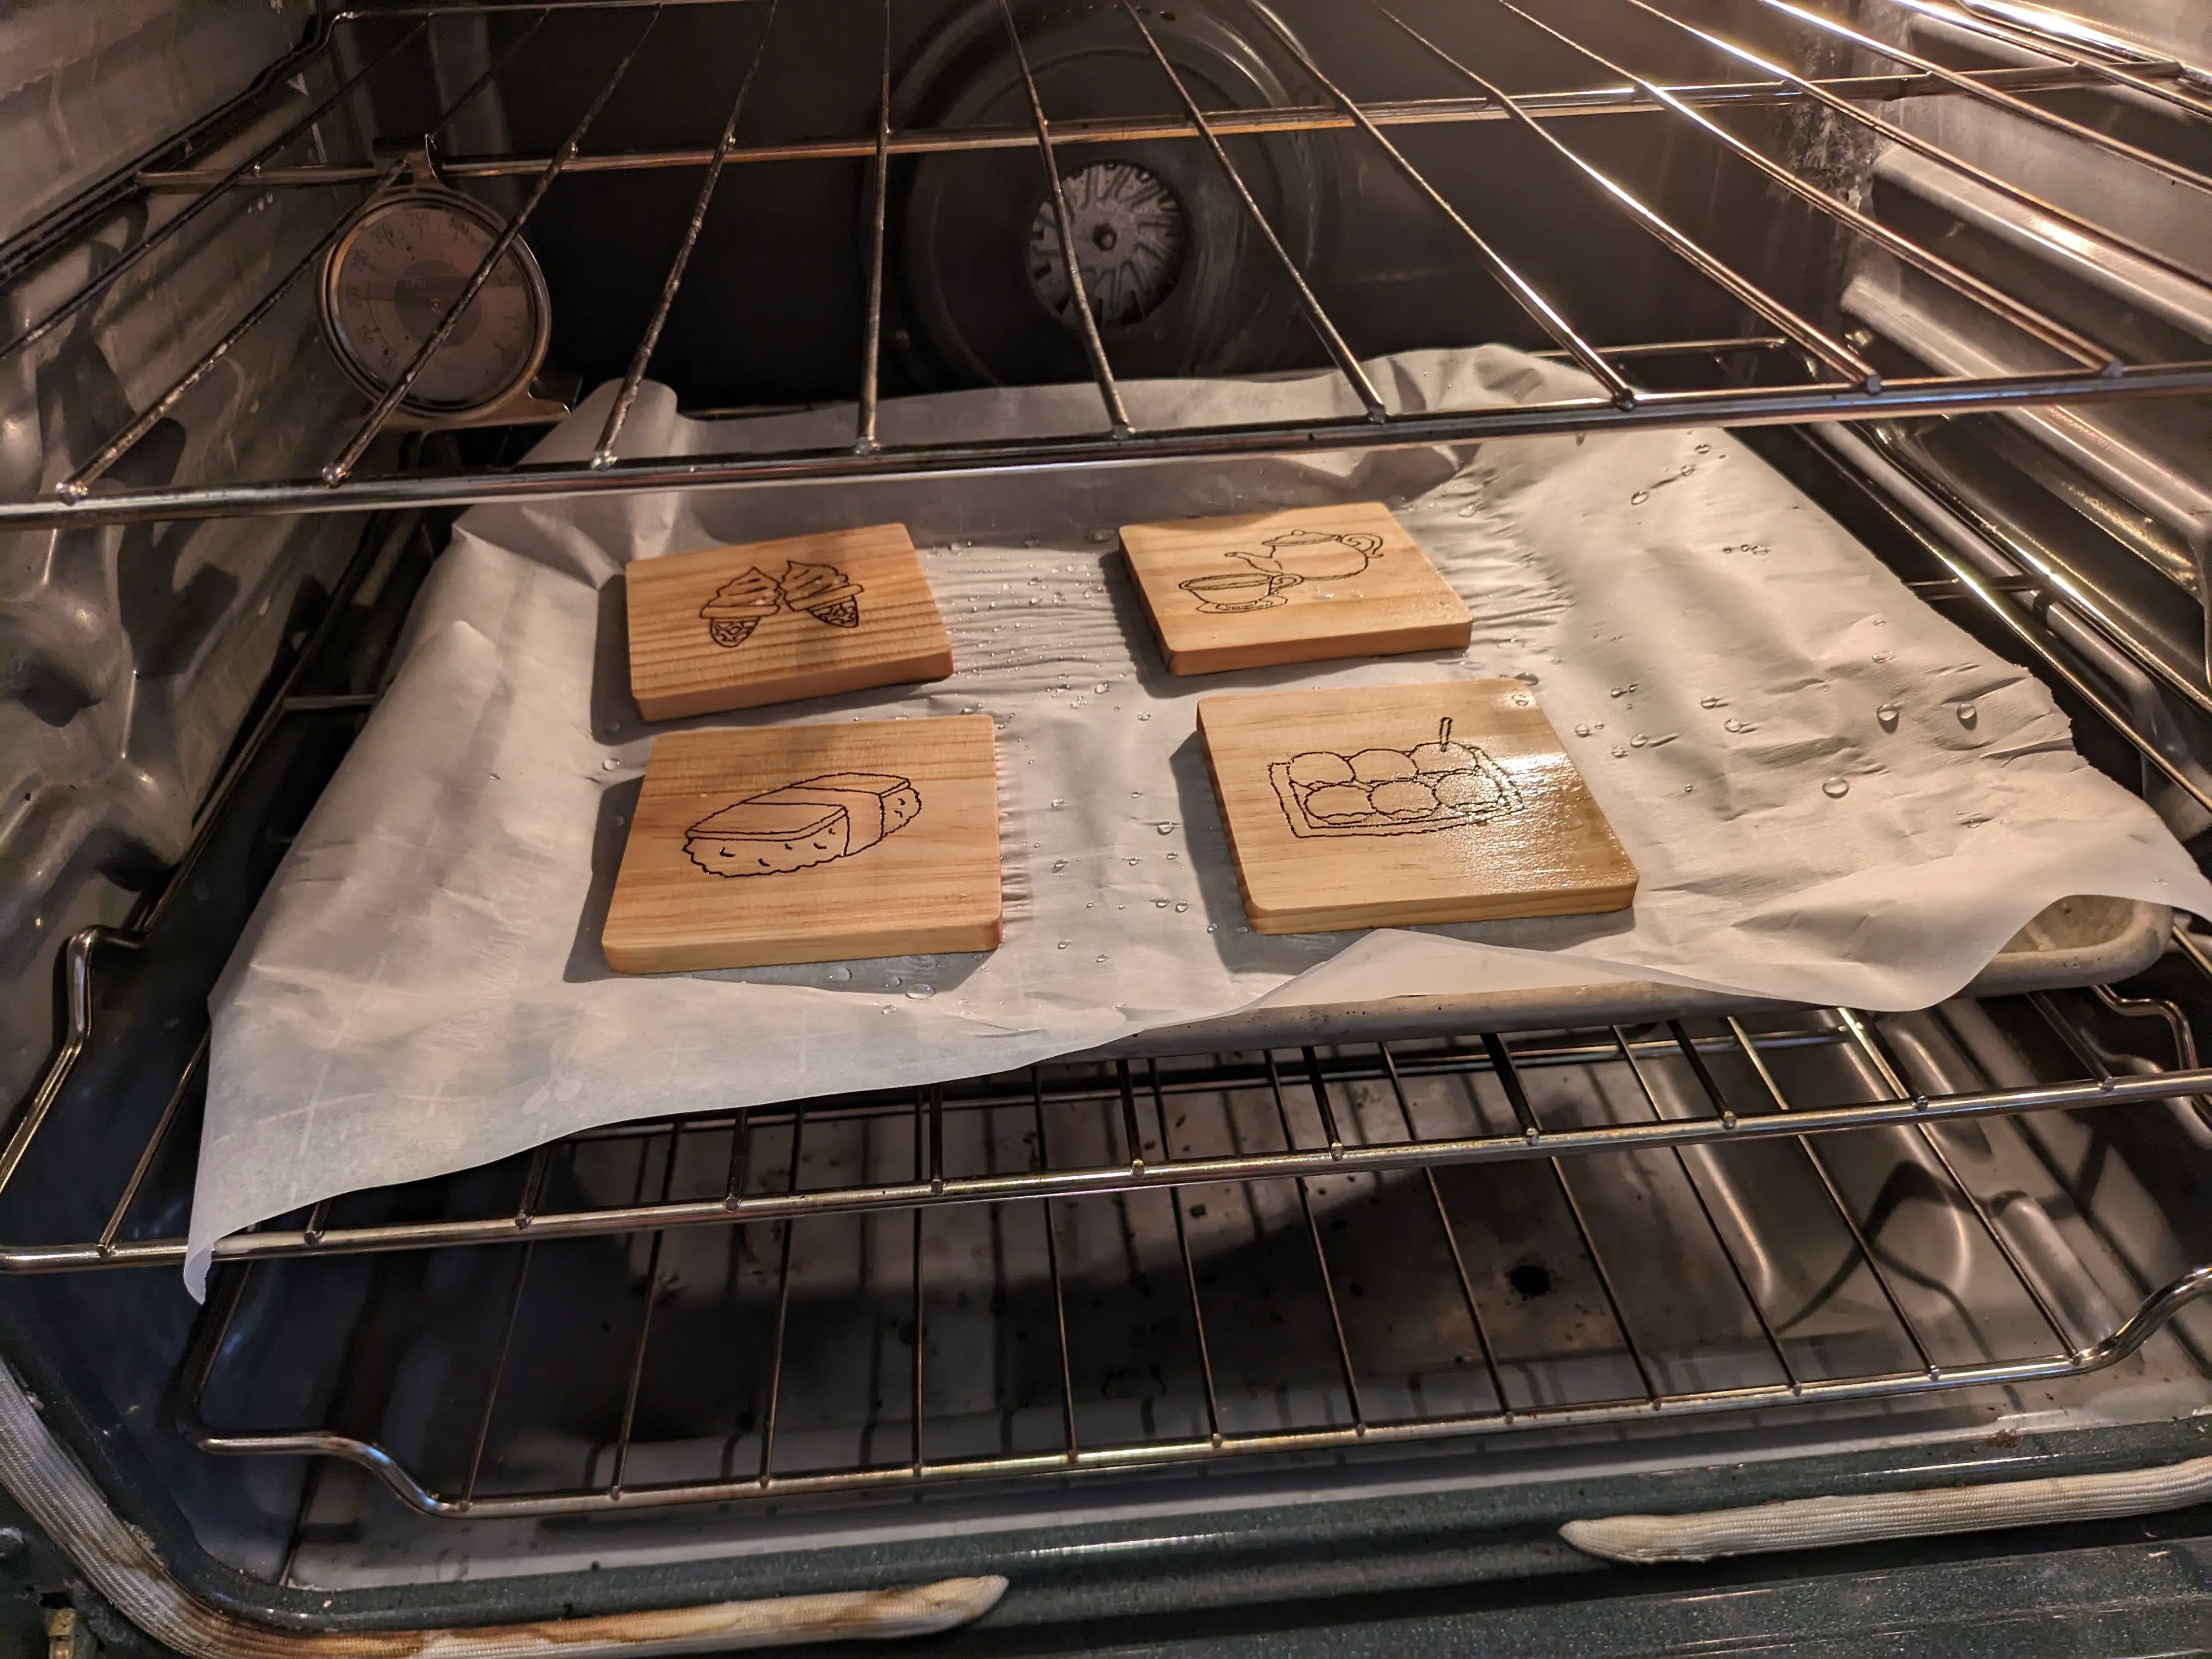 Image showing wet wood coasters on a baking sheet in the oven.